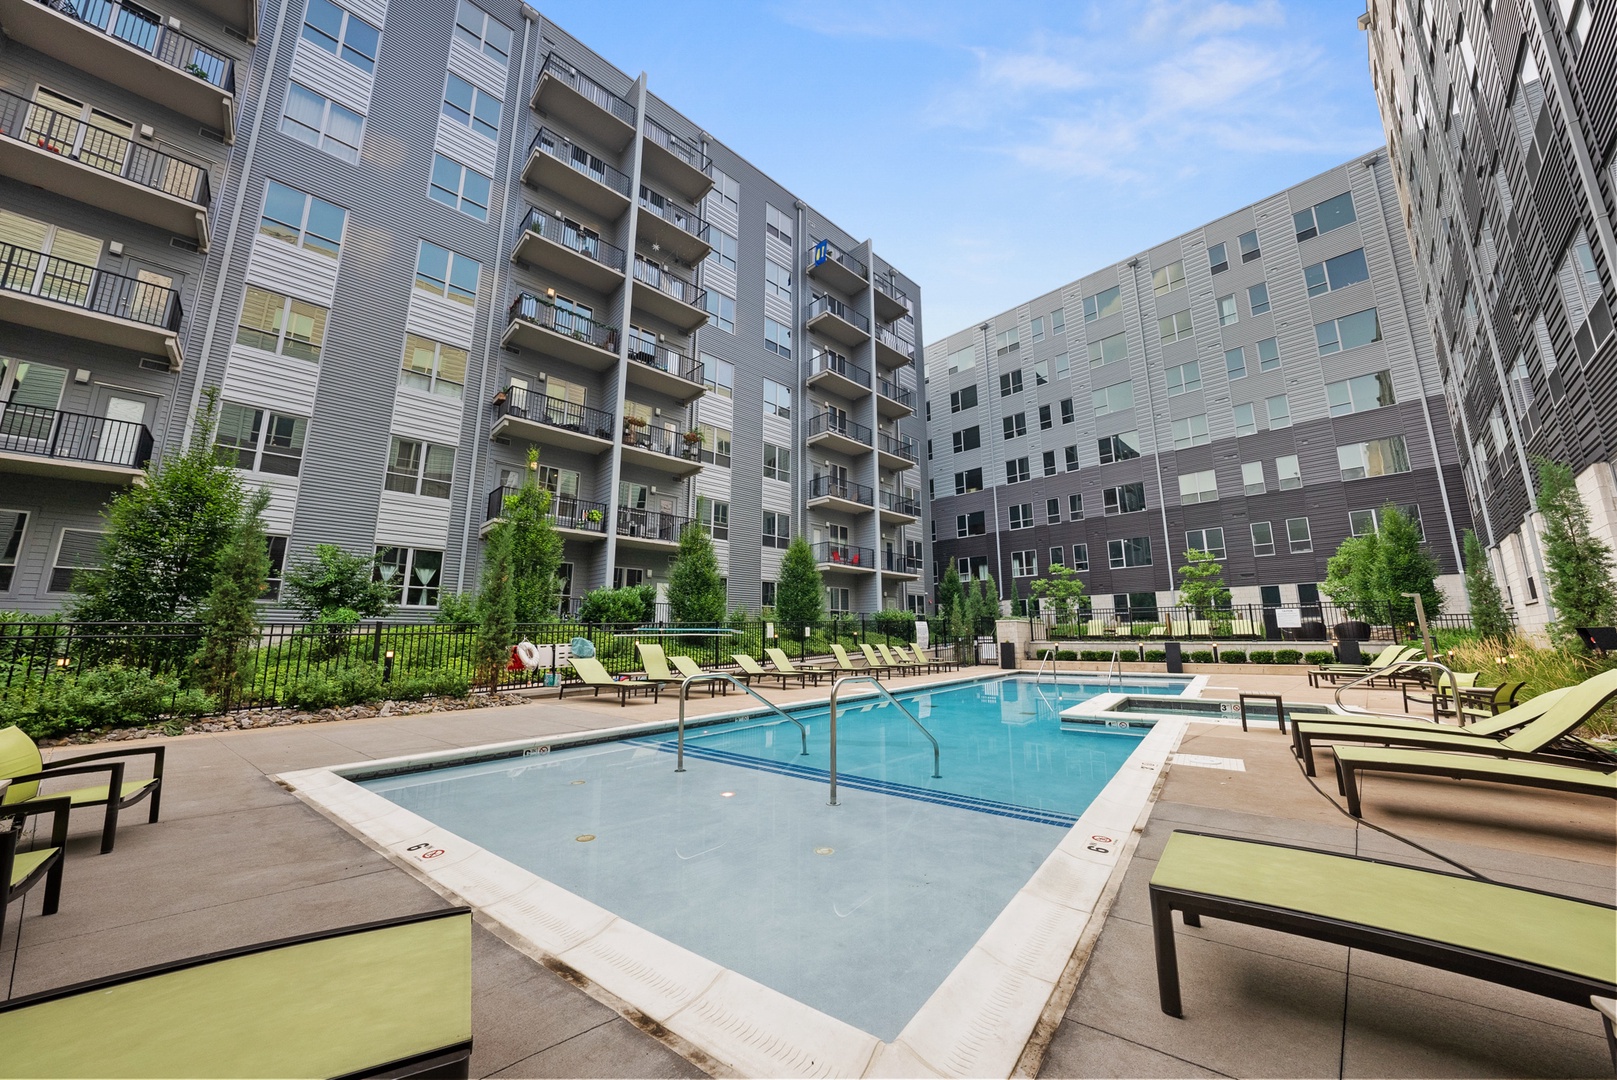 Live, work, and play right in the heart of downtown Louisville at The EDGE on 4th